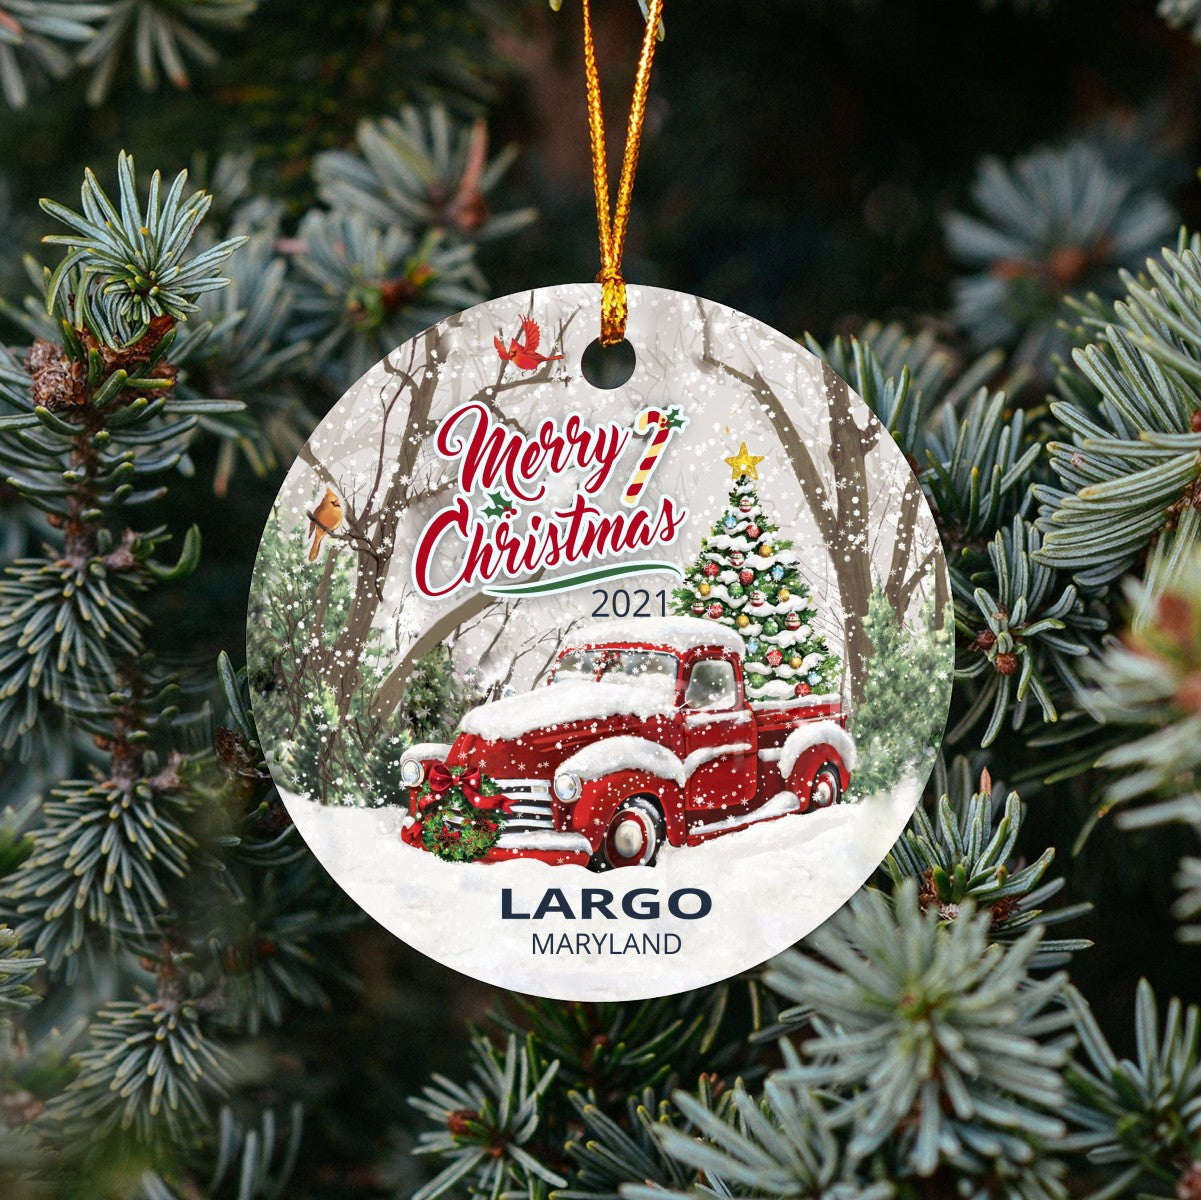 Christmas Tree Ornaments Largo - Ornament With Name City, State Largo Maryland MD Ornament - Red Truck Xmas Ornaments 3'' Plastic Gift For Family, Friend And Housewarming